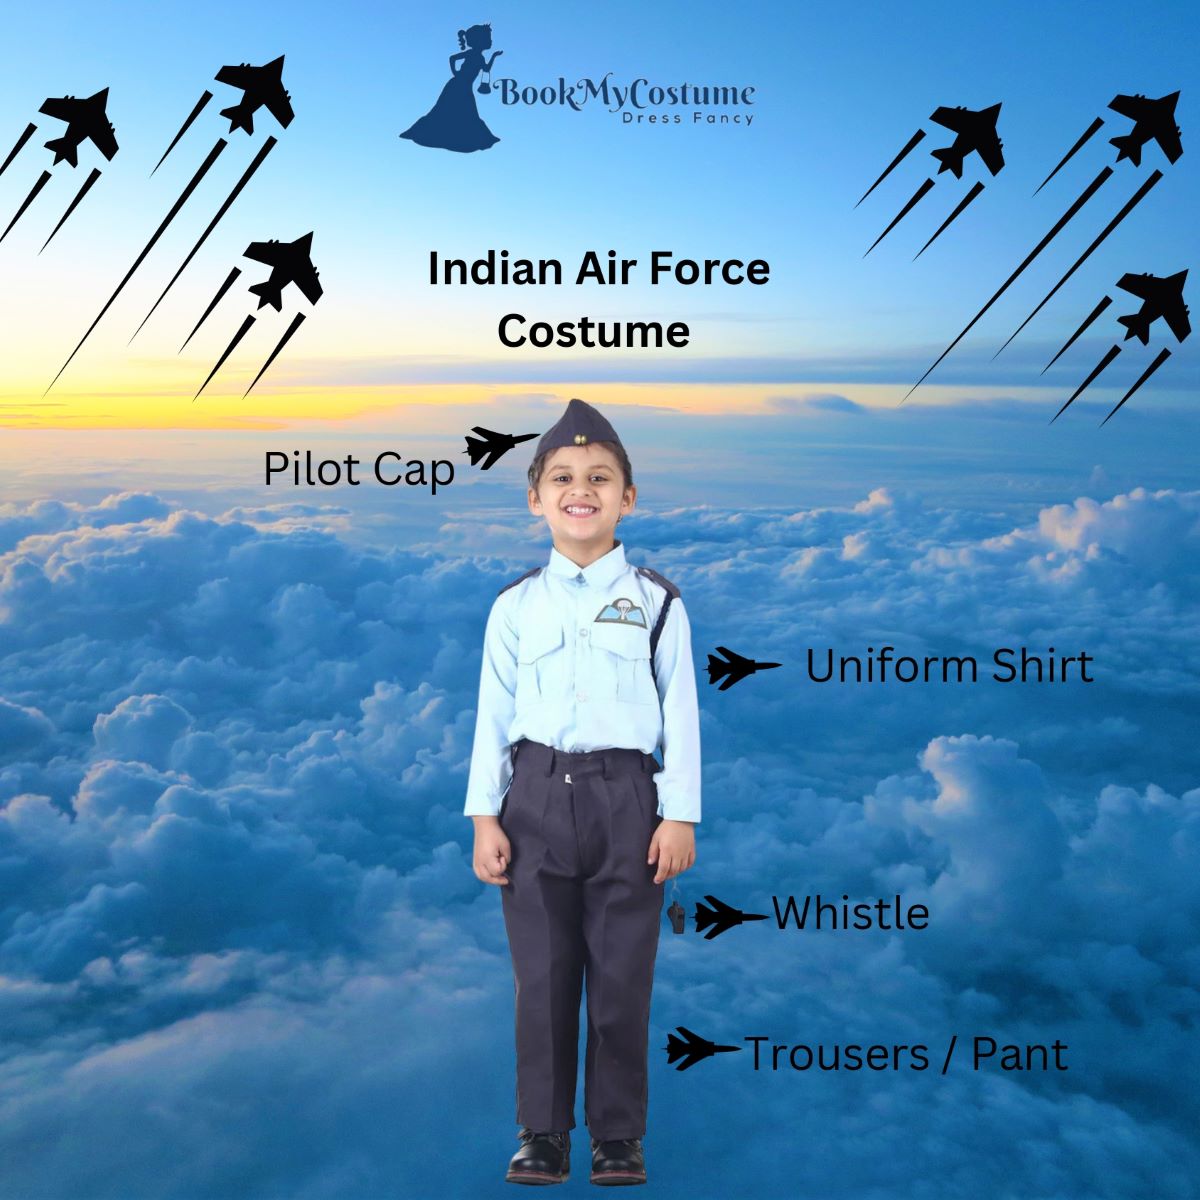 Buy BookMyCostume Indian Air Force Defense Pilot Uniform Kids Fancy Dress  Costume - Blue Adults S Online at Lowest Price Ever in India | Check  Reviews & Ratings - Shop The World